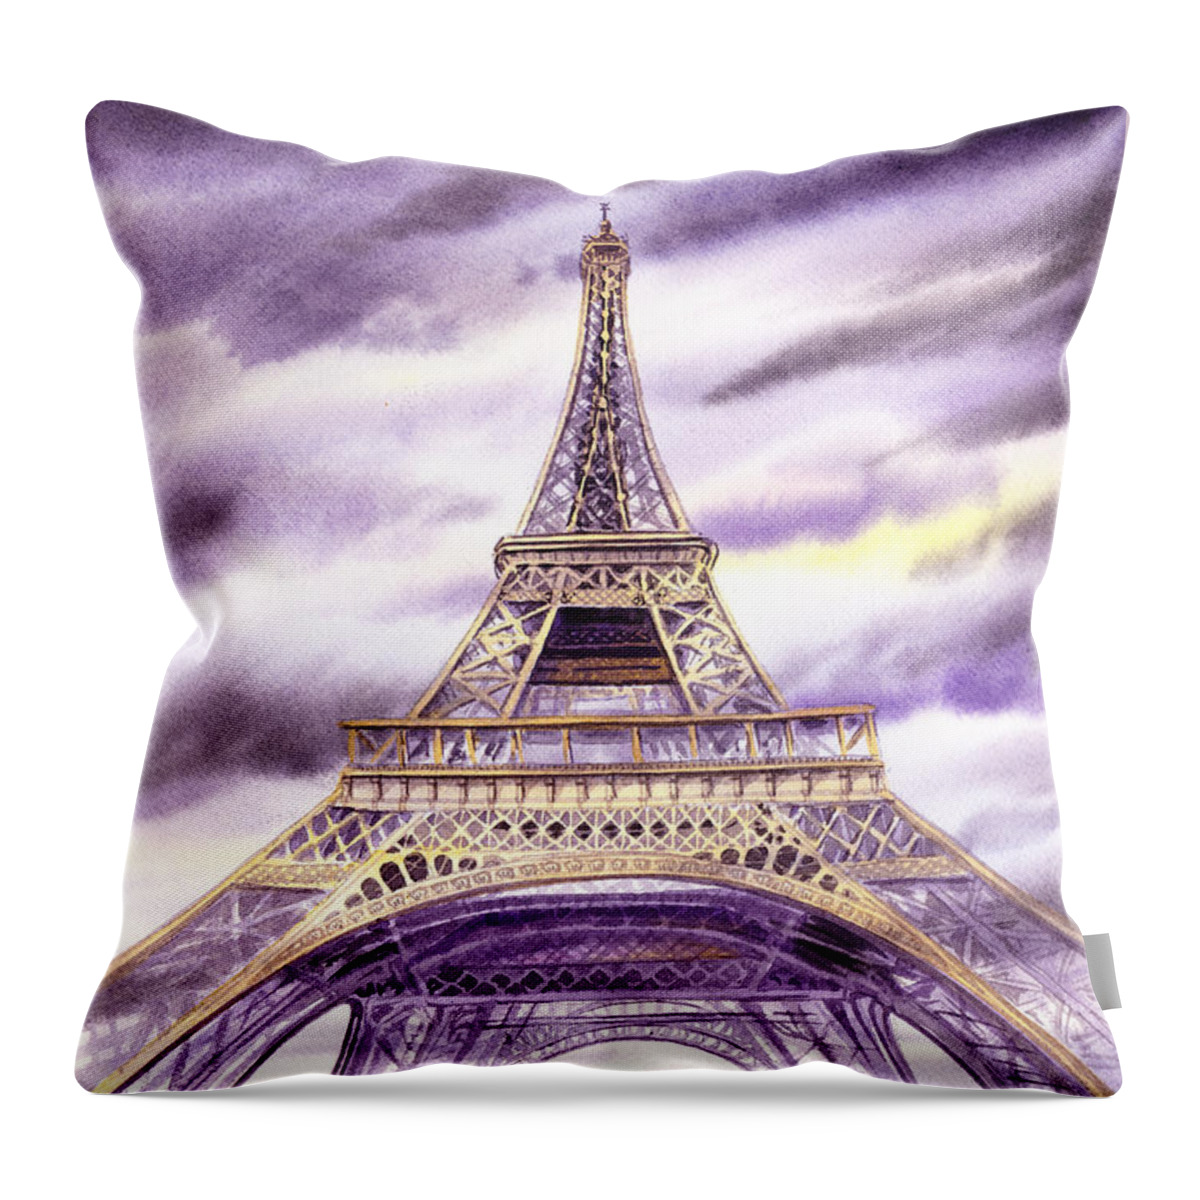 France Throw Pillow featuring the painting Evening In Paris A Walk To The Eiffel Tower by Irina Sztukowski